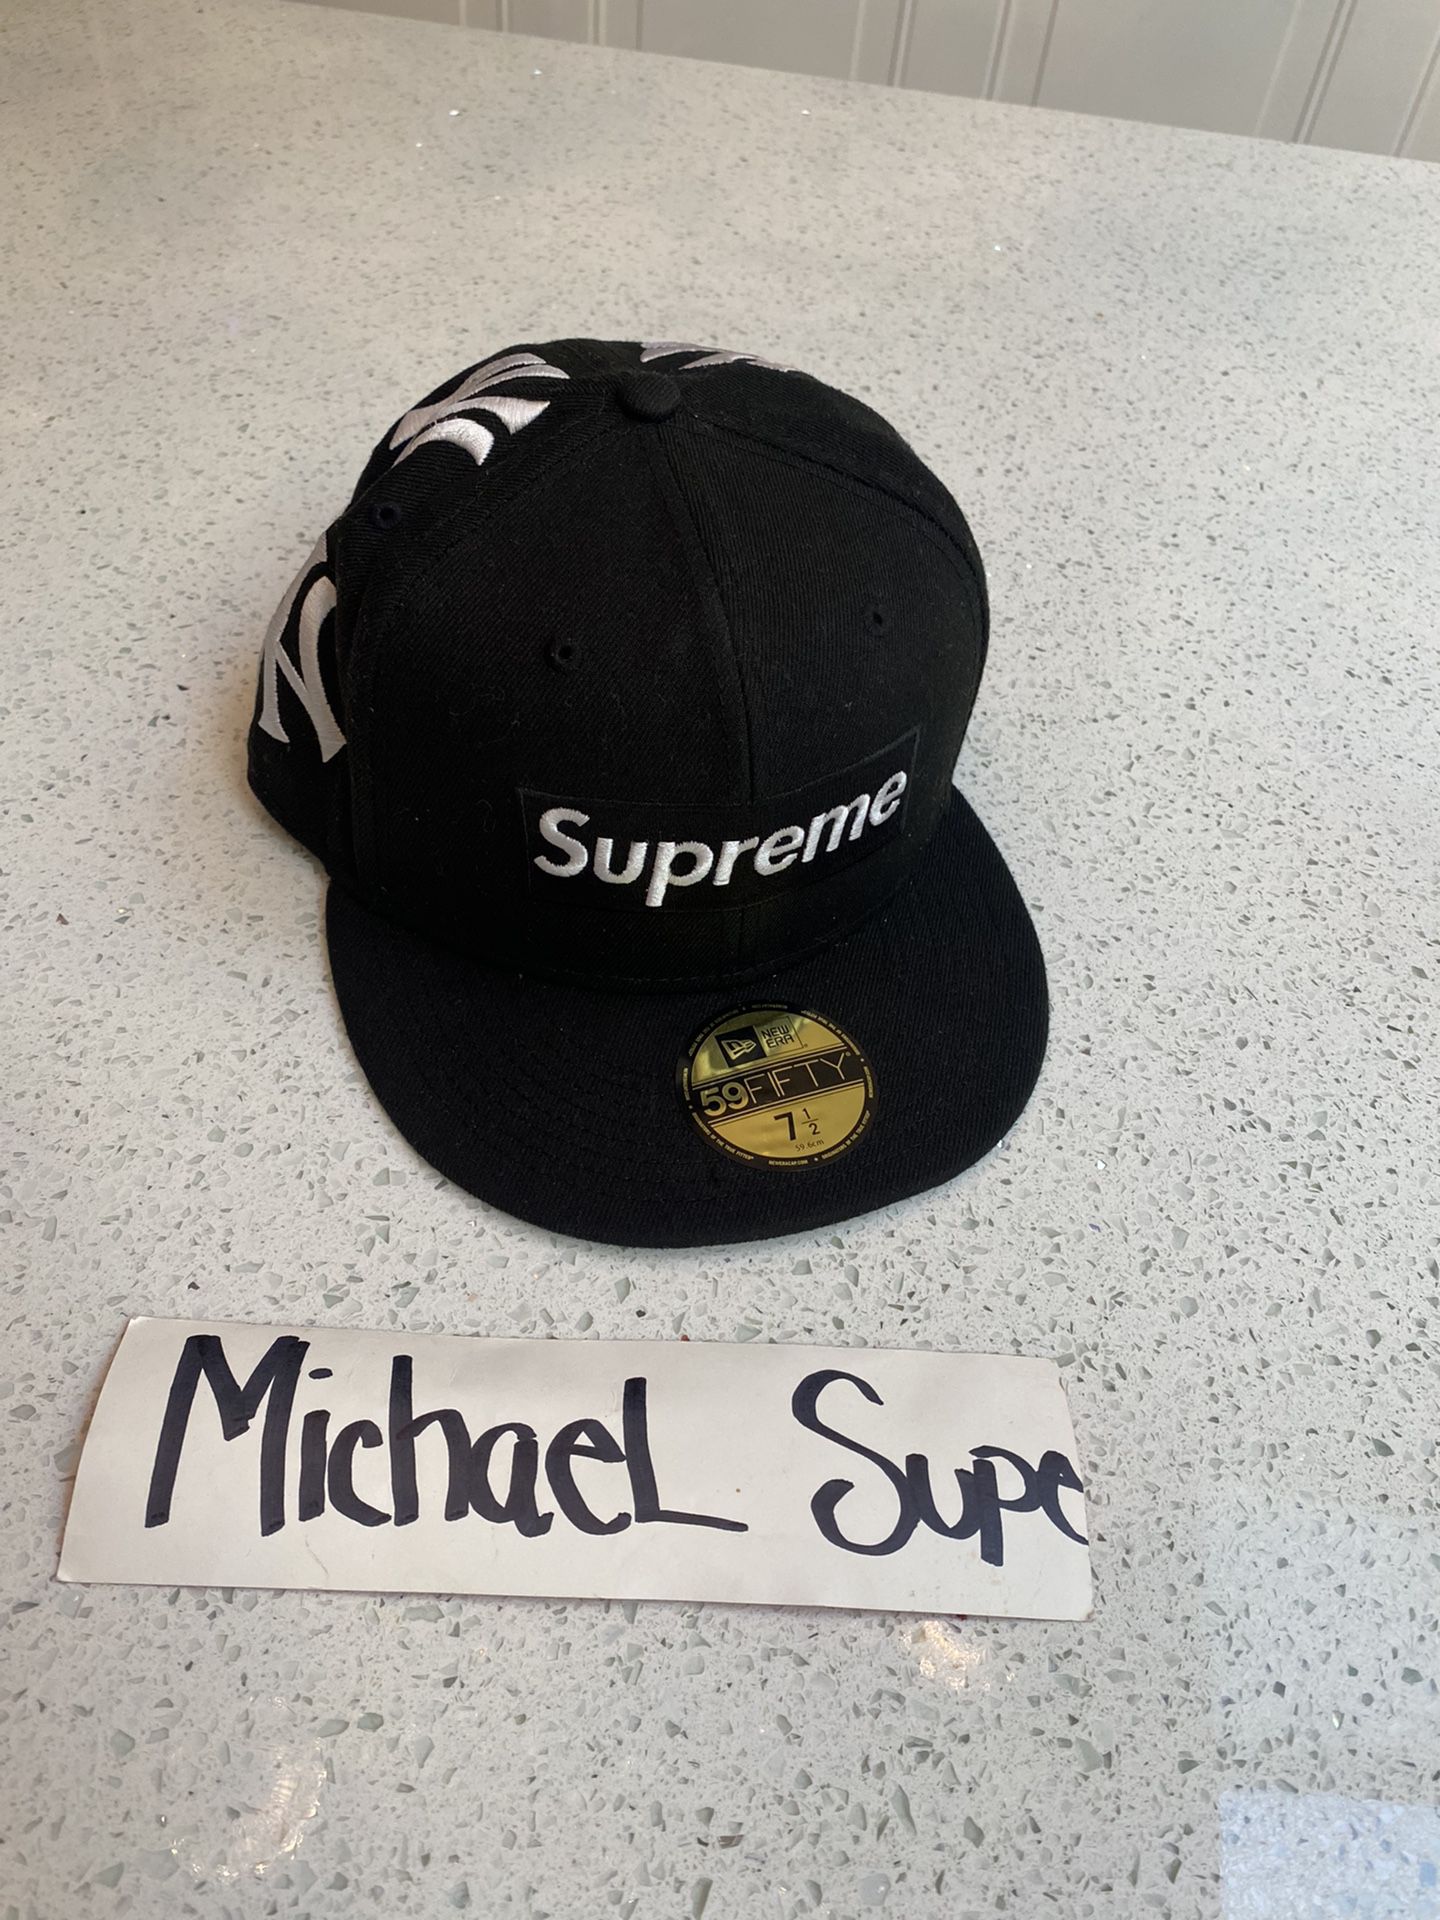 Supreme Fitted Hat